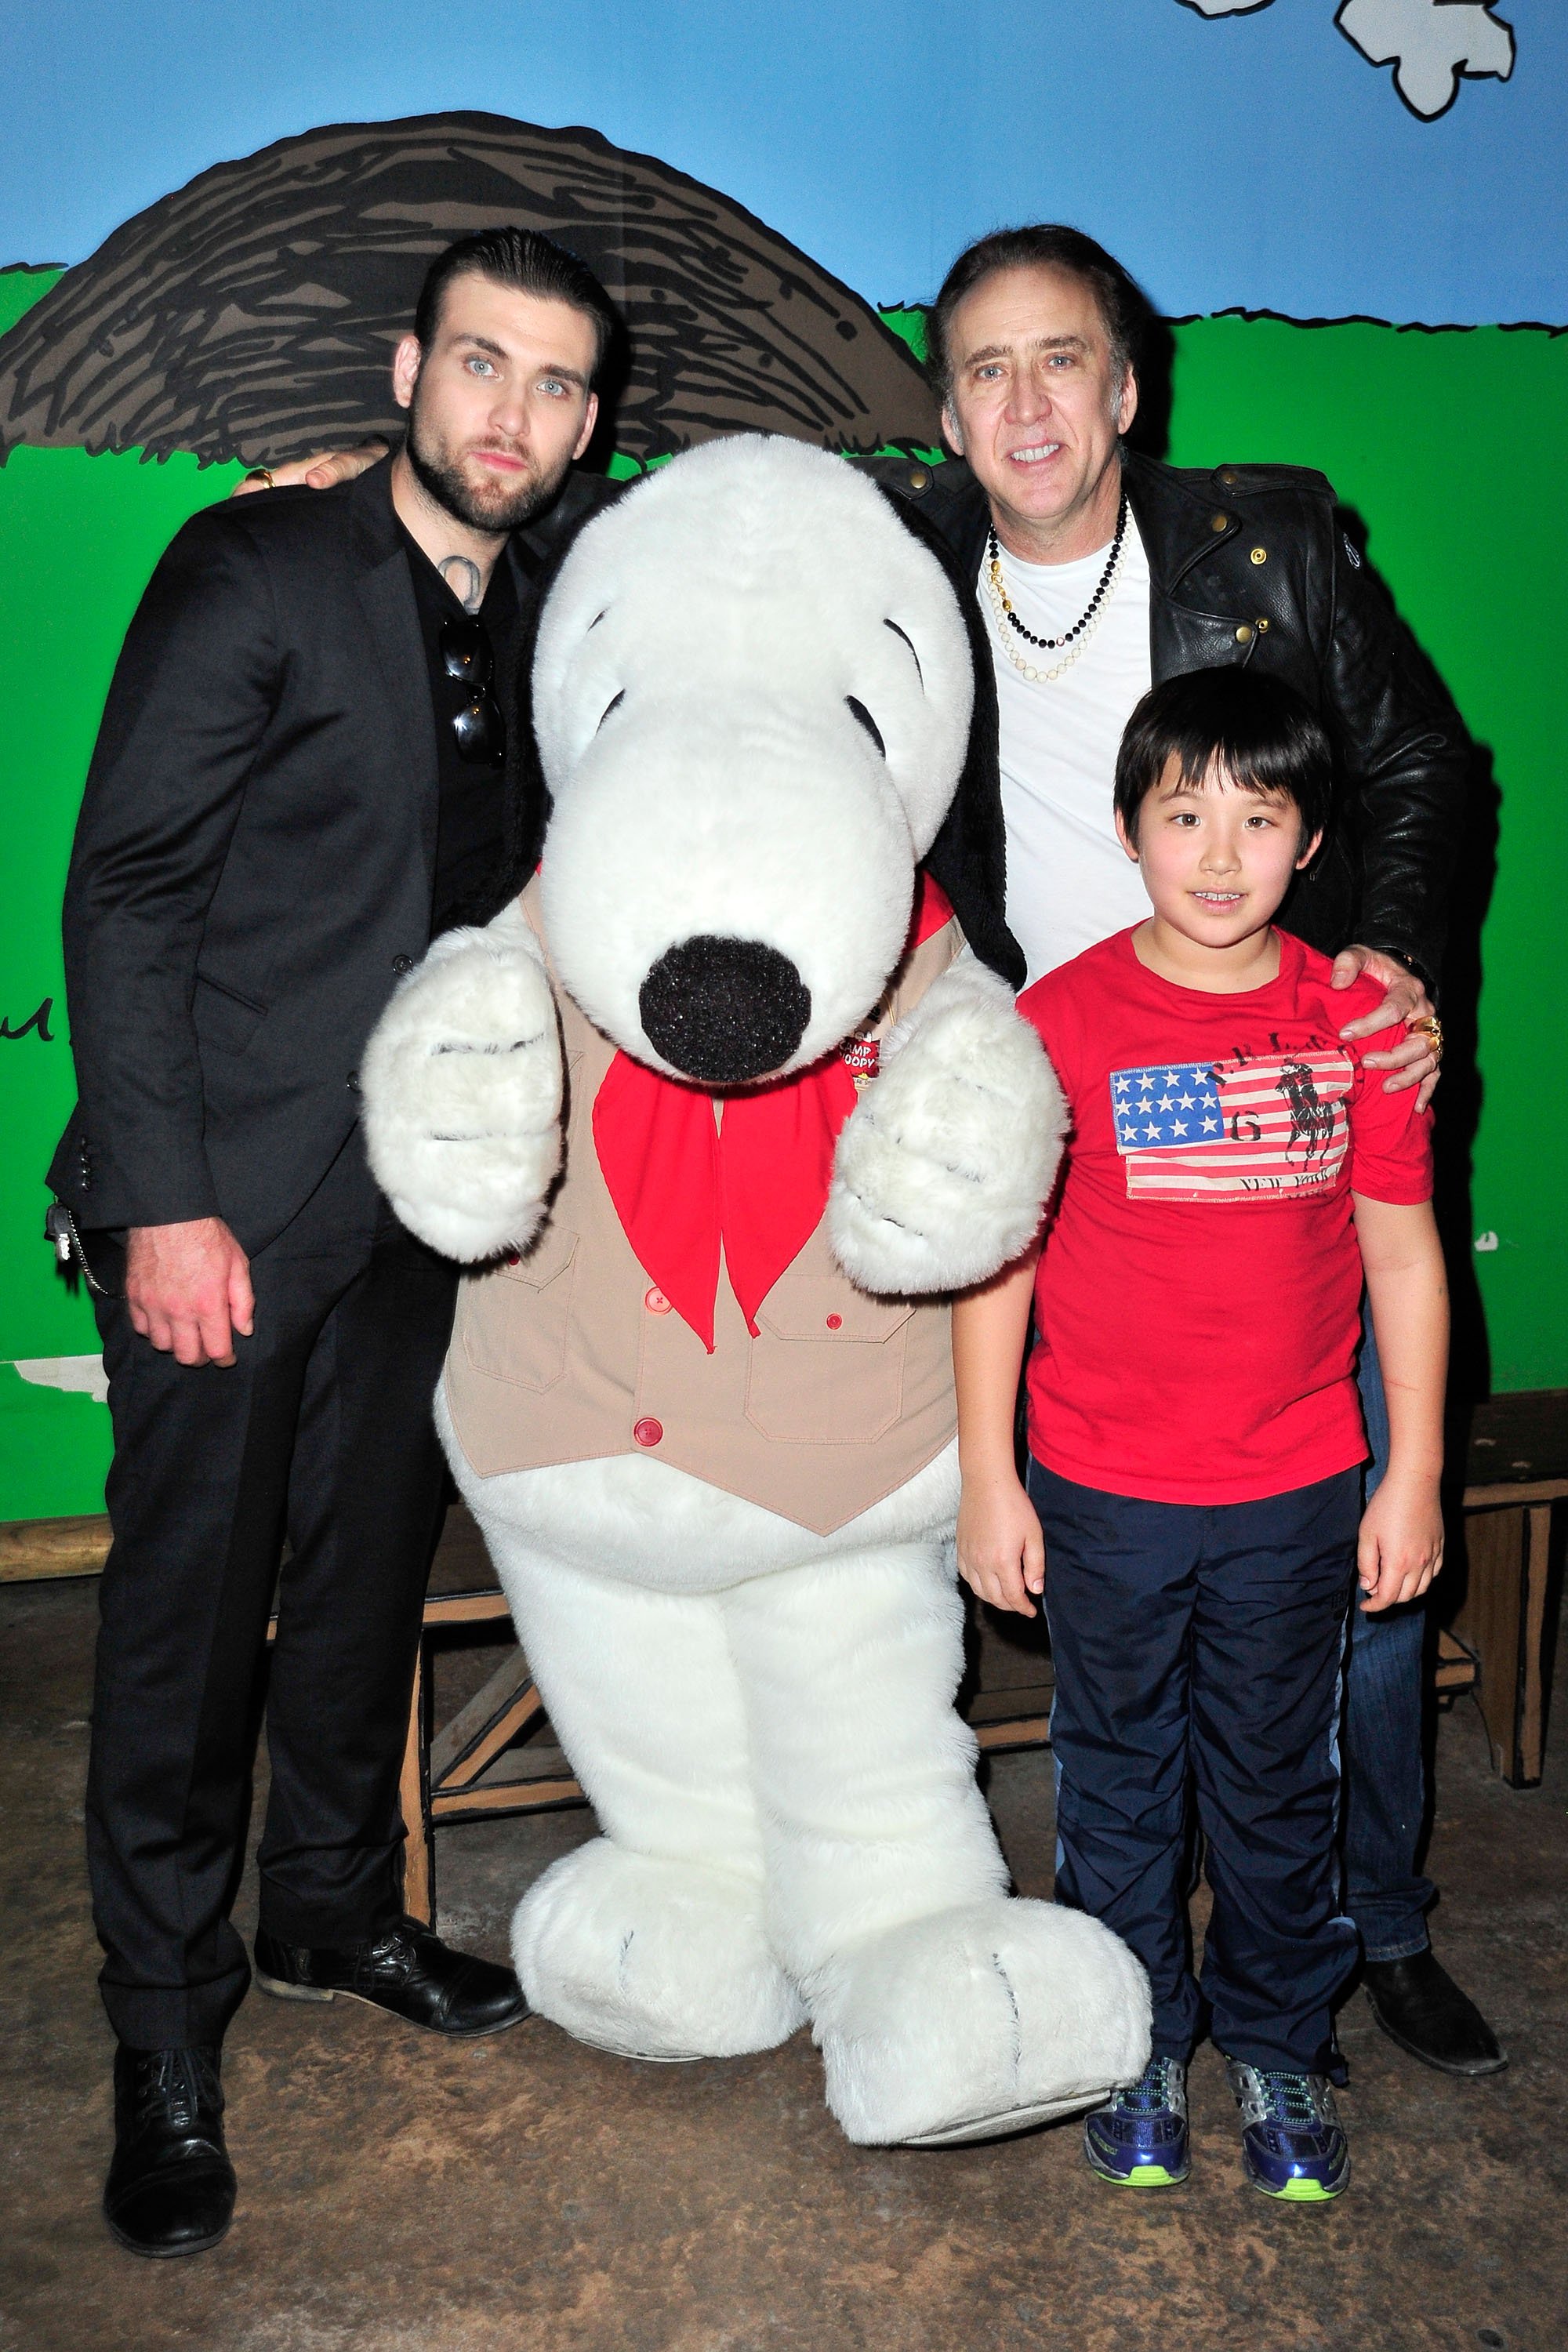 Actor Nicholas Cage visits Knott's Berry Farm with sons Weston (L) and Kal-El on September 12, 2015 in Buena Park, California | Source: Getty Images